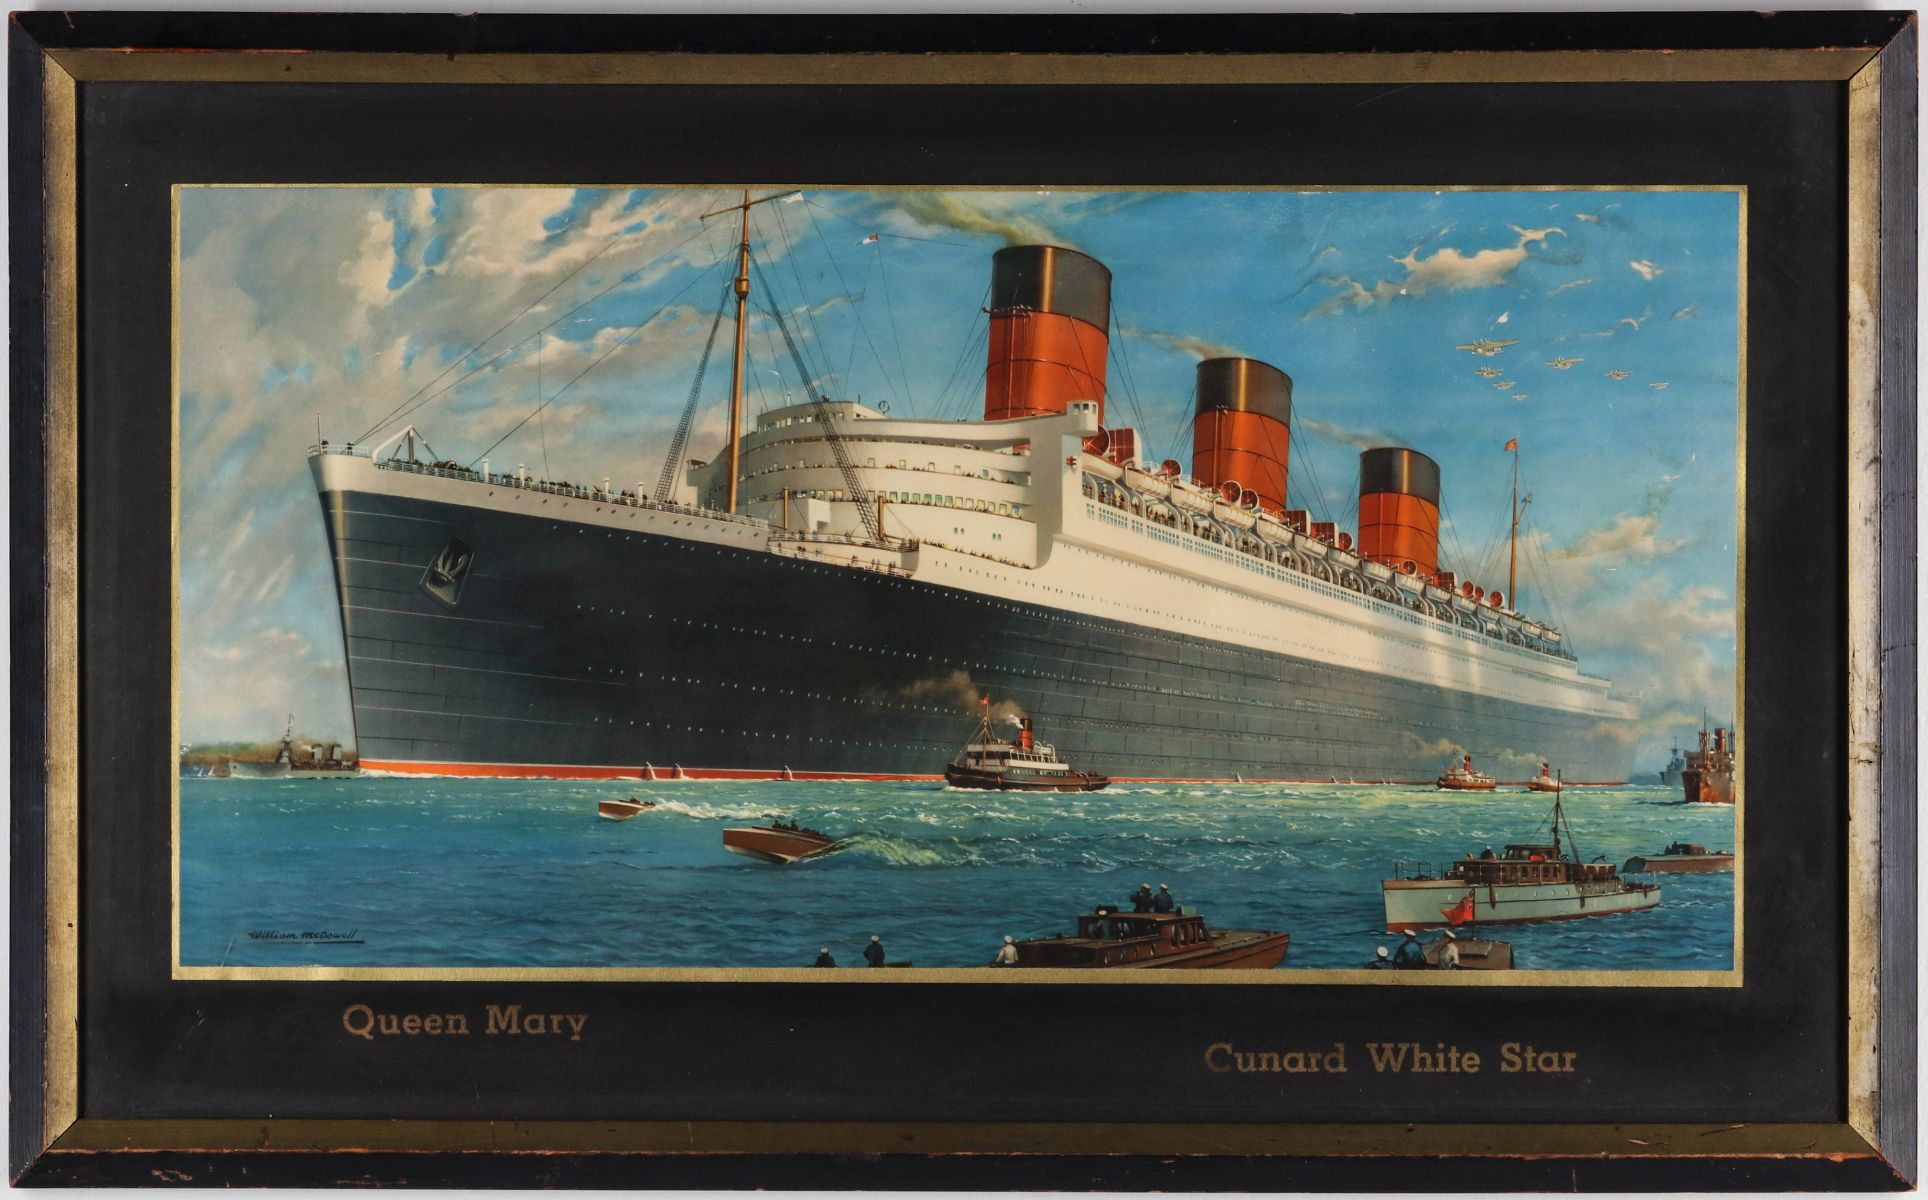 LARGE CUNARD WHITE STAR 'QUEEN MARY' ADVERTISING PRINT